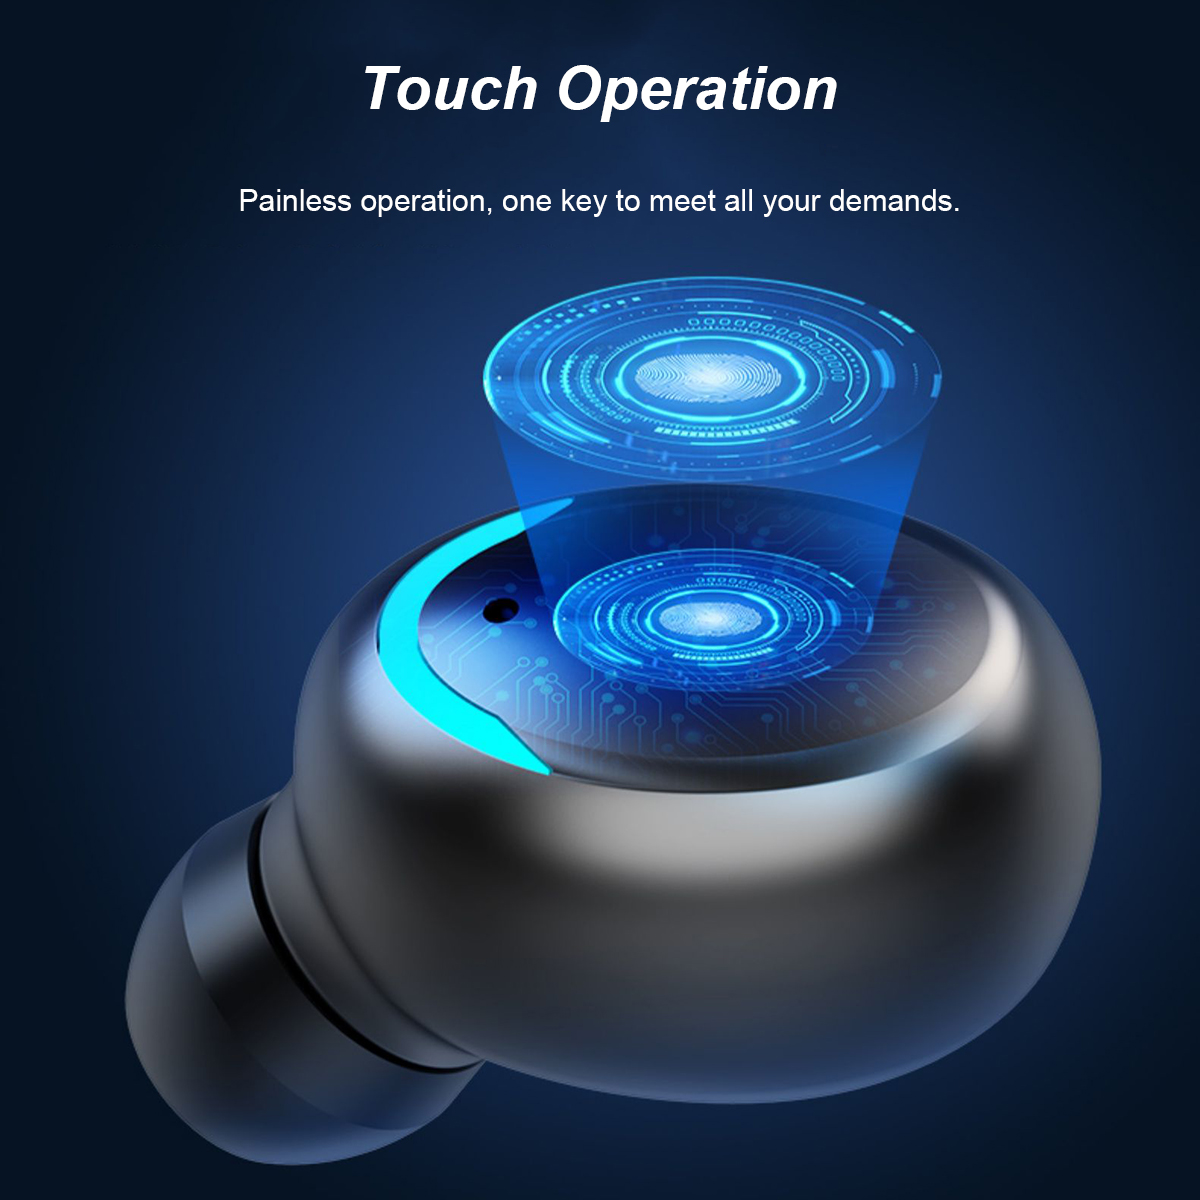 Mini-TWS-Wireless-bluetooth-50-Earphone-LED-Display-Power-Bank-Smart-Touch-Headphone-with-Mic-for-iP-1629900-2